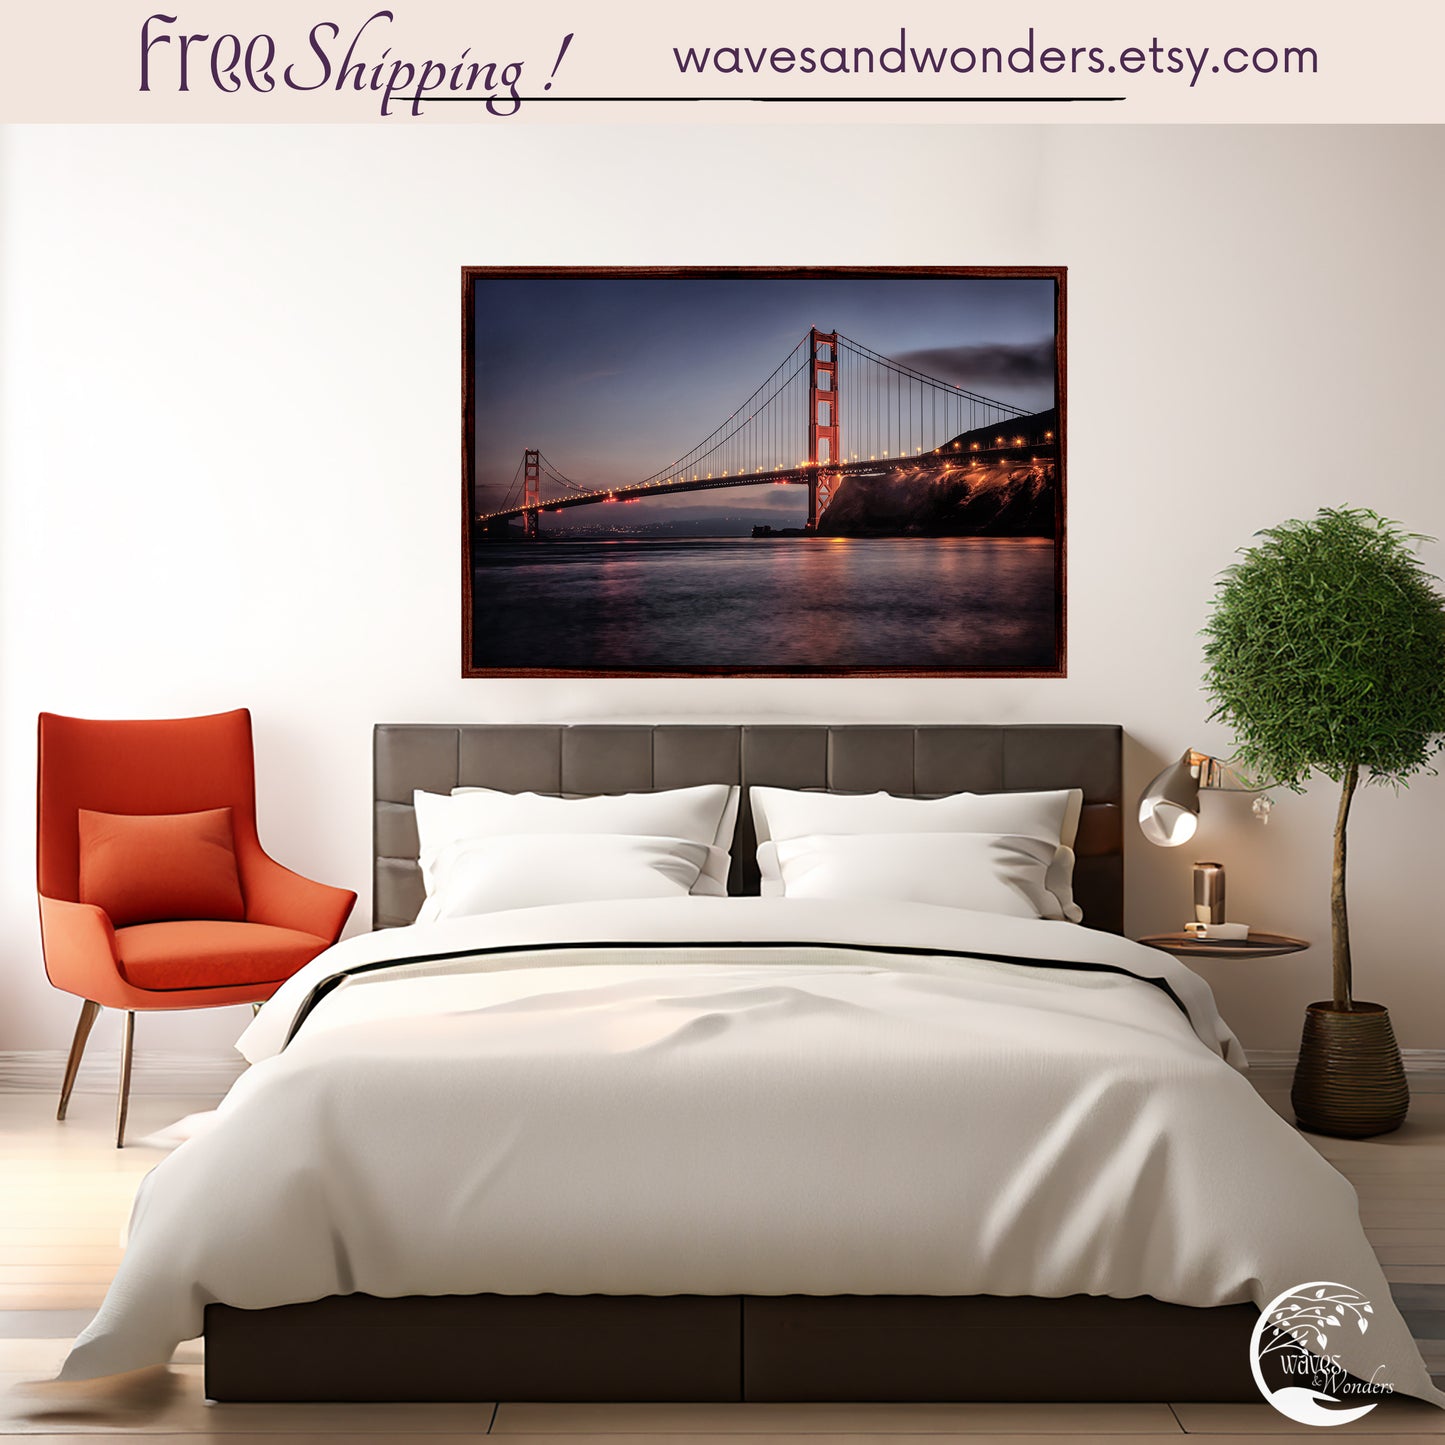 a bed with a picture of a bridge on the wall above it